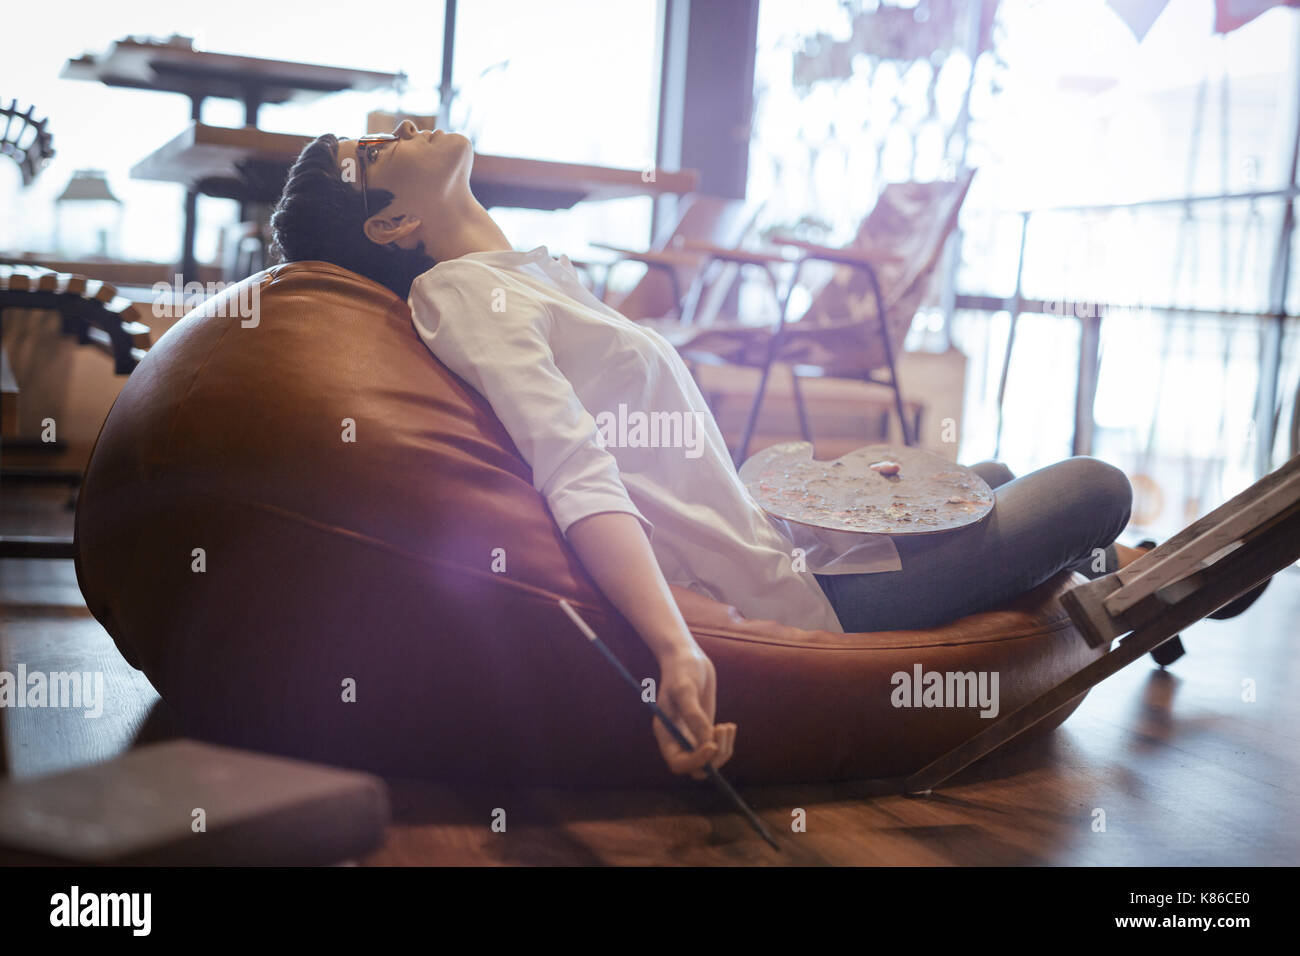 Tried overworked female artist sleeping while working Stock Photo